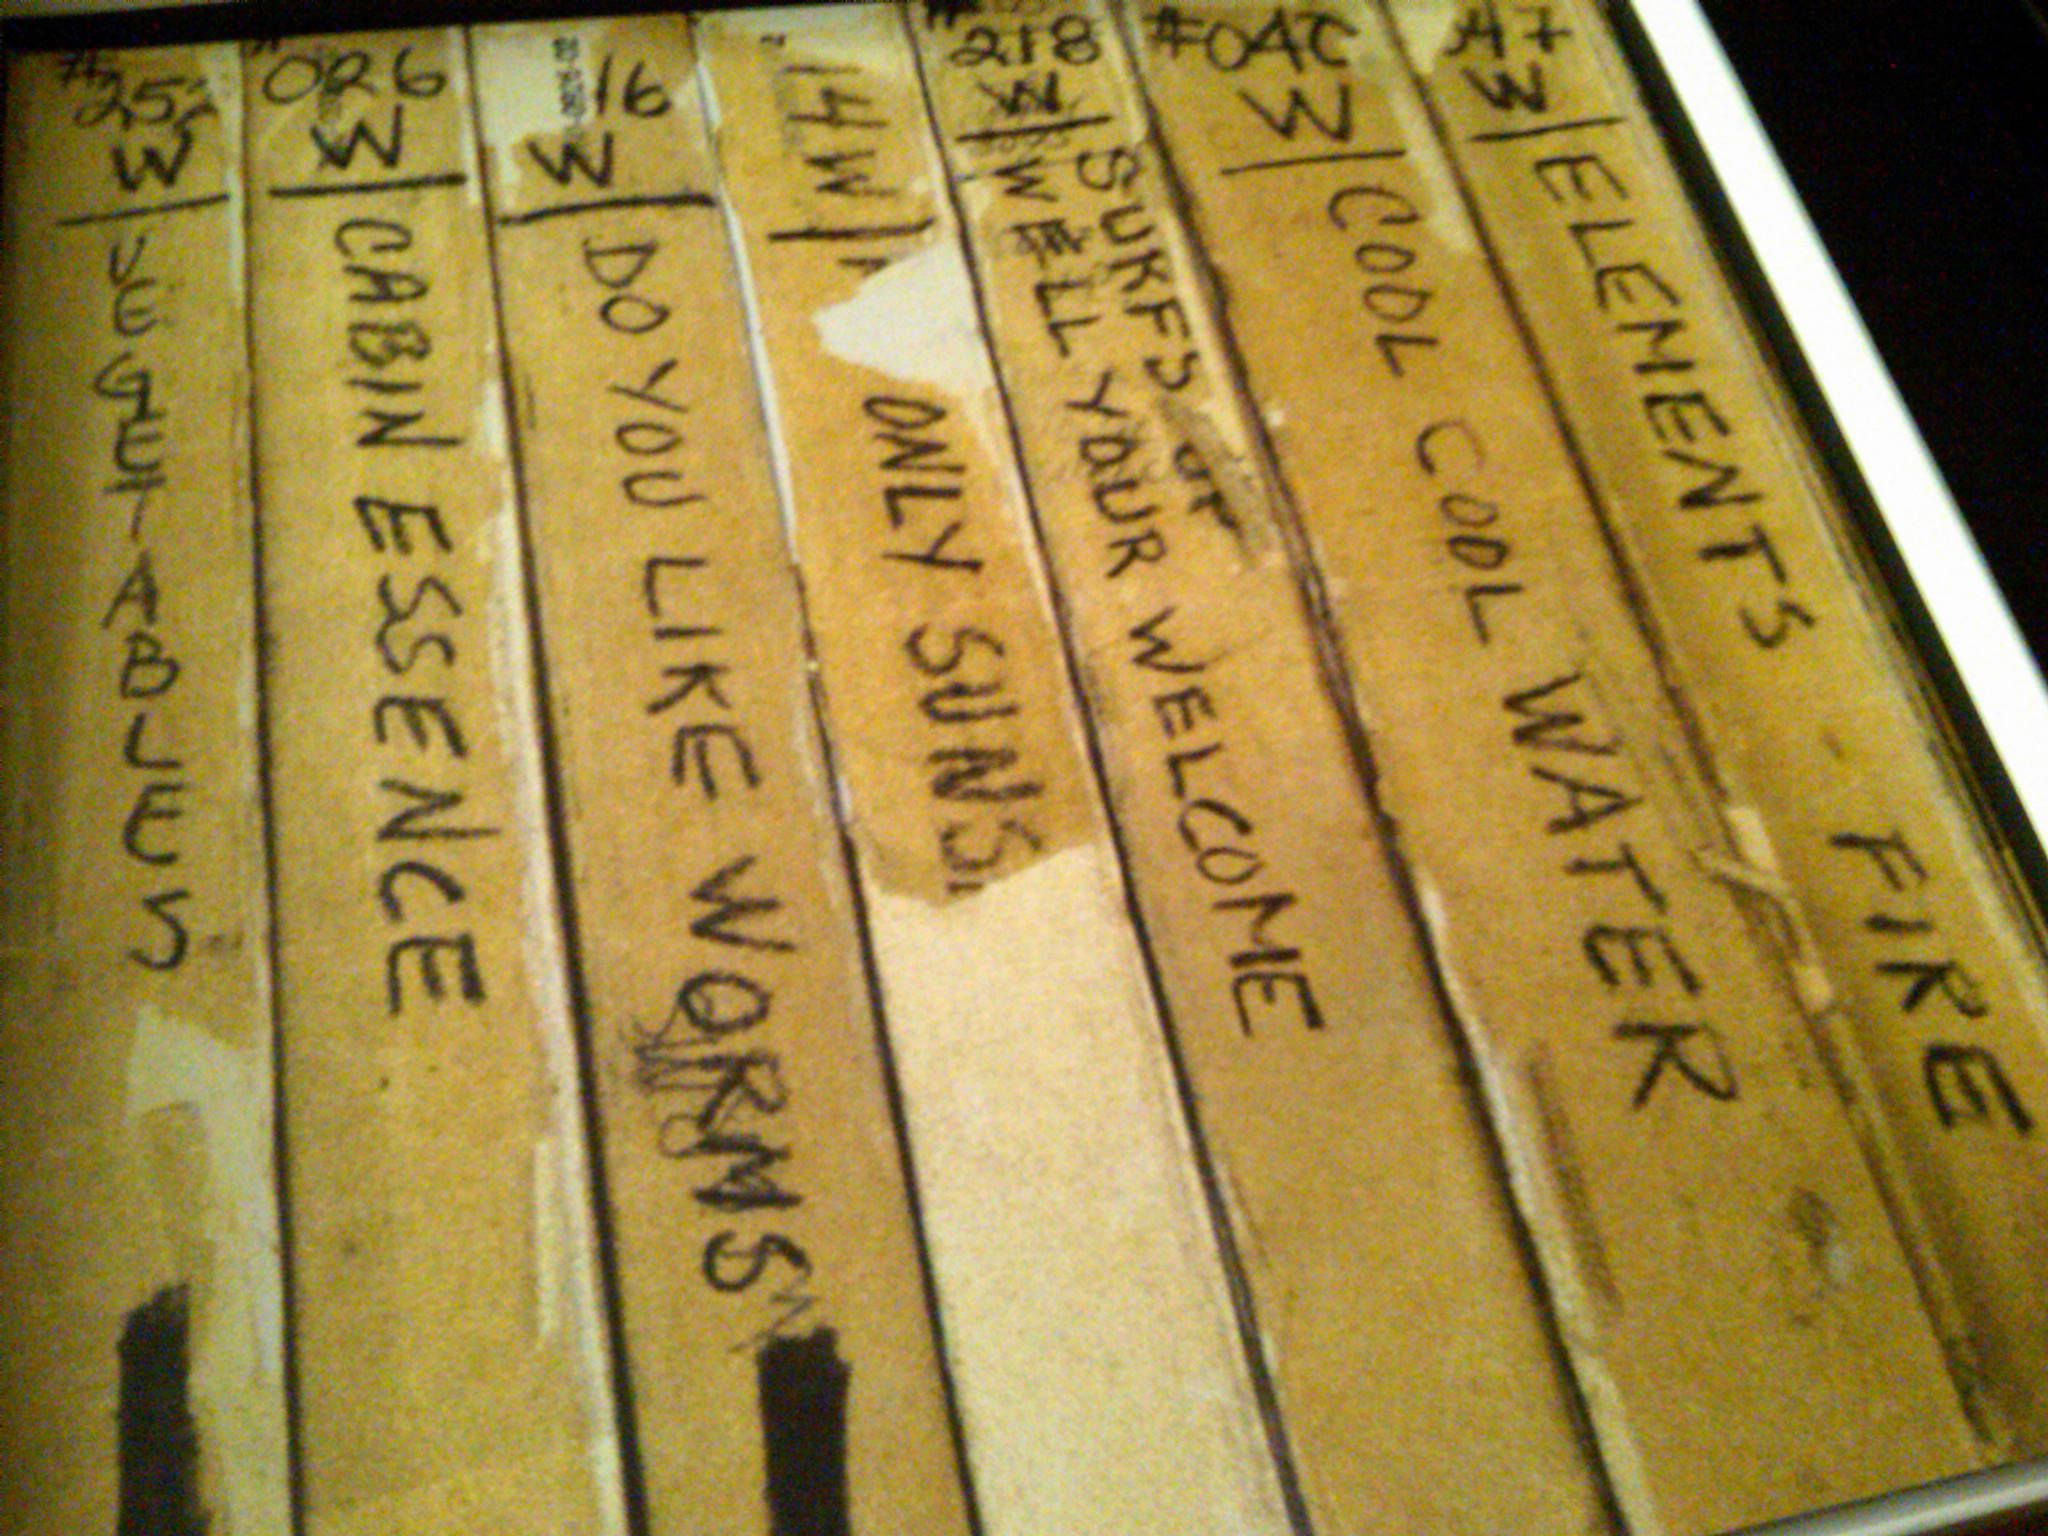 A photo of master tapes for various songs from SMiLE.